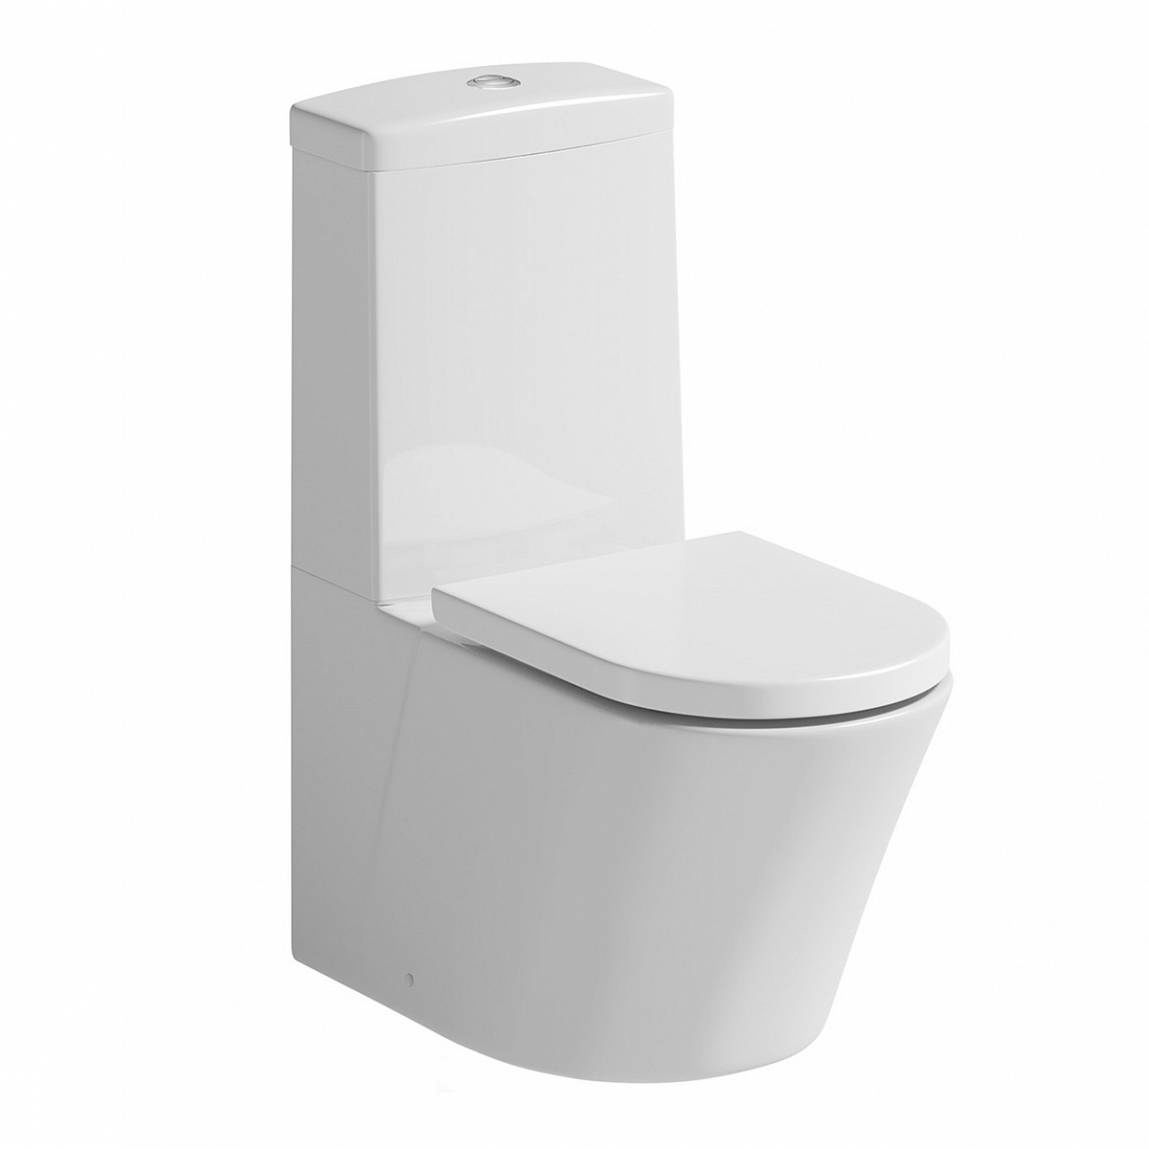 croydex soft close toilet seat fitting instructions